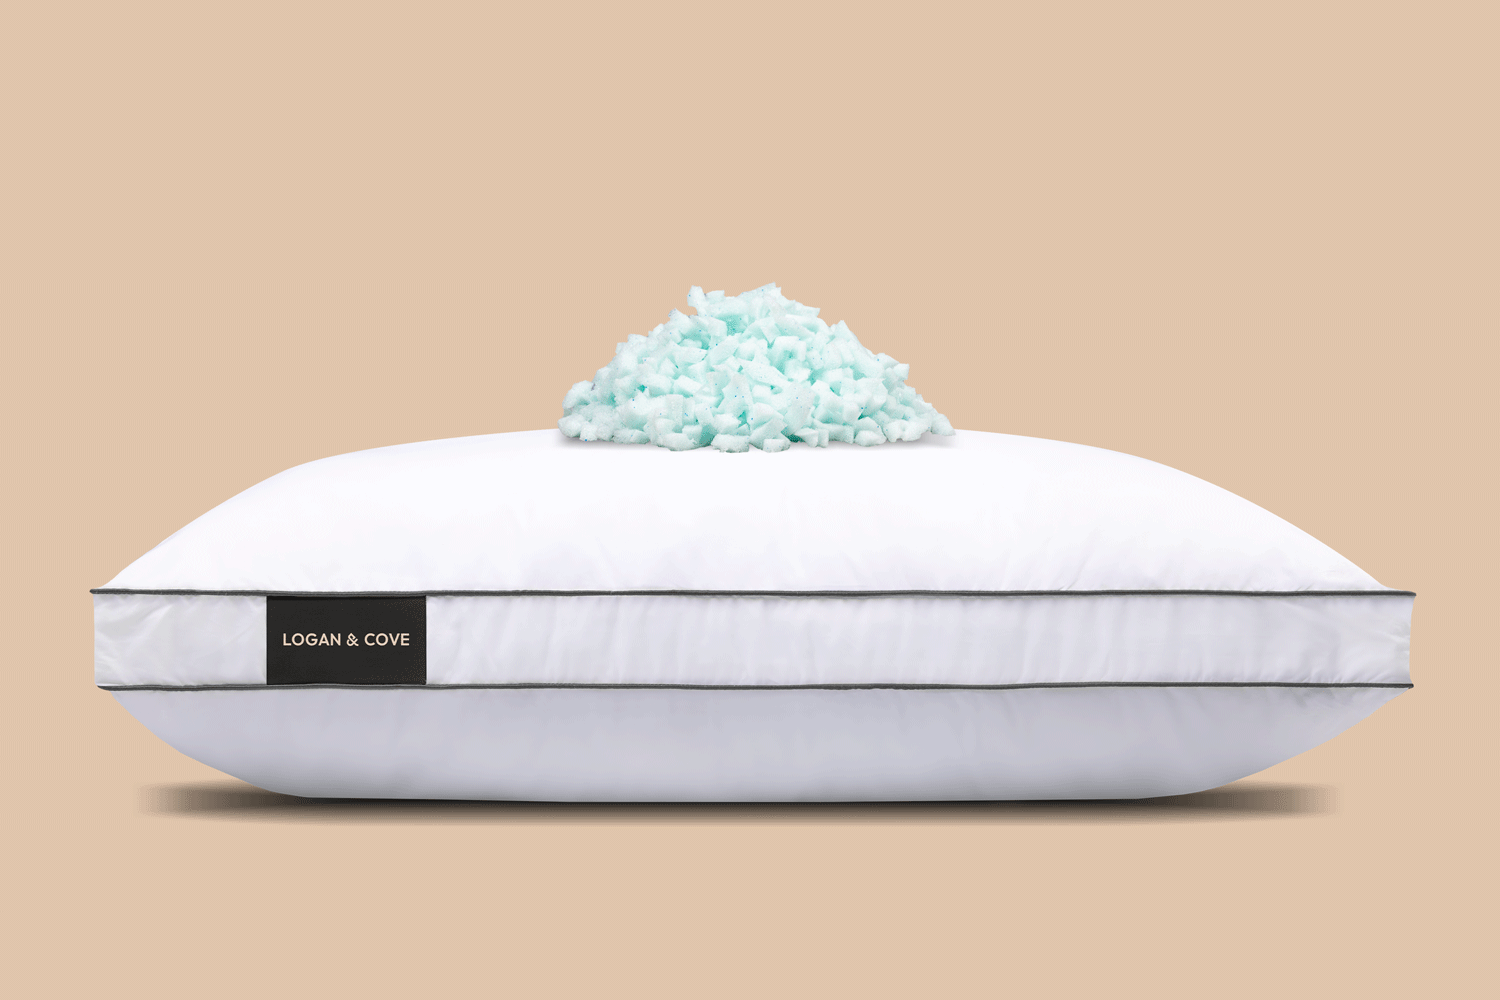 Different loft options of the Adjustable Memory Foam Pillow